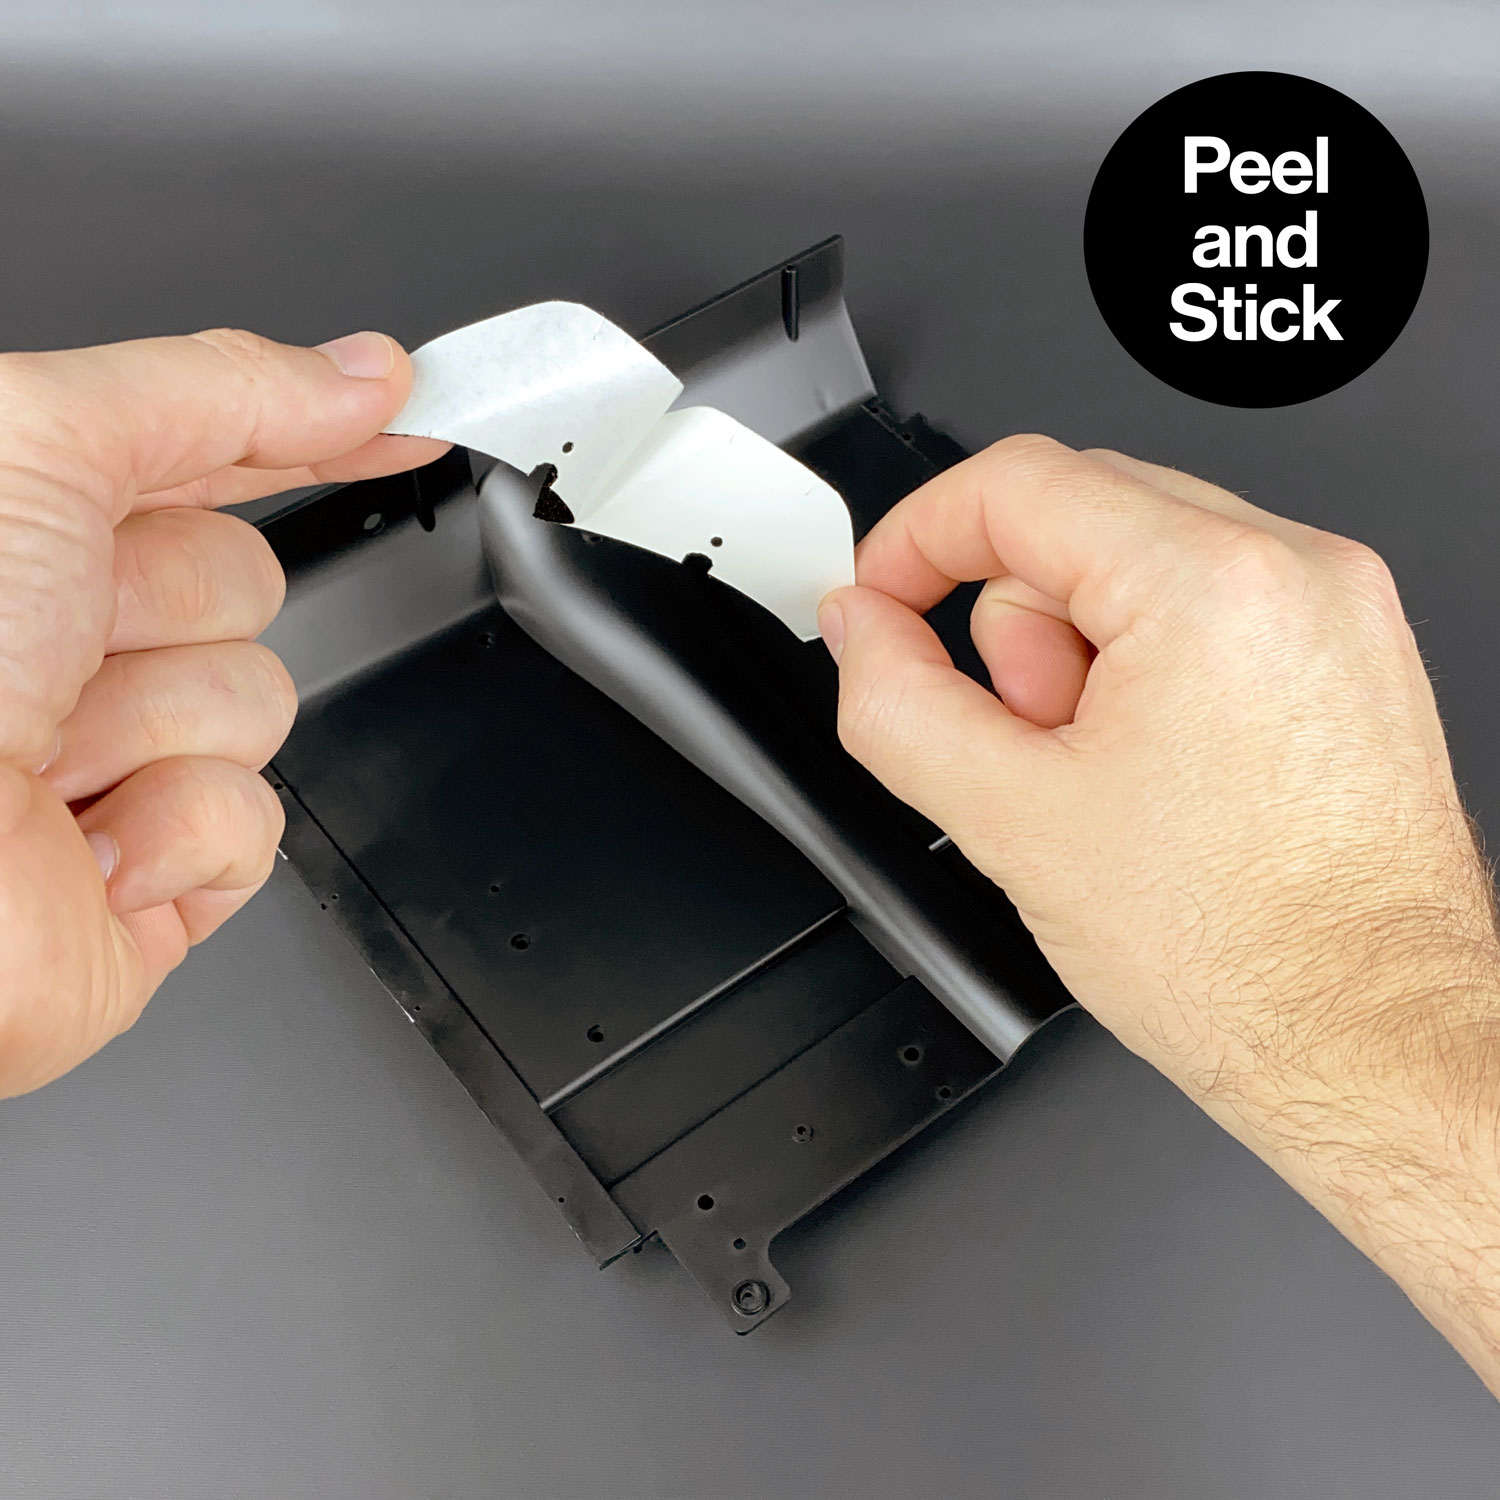 Peel and Stick pad for Ecto-1 Self-Adhesive Carpets